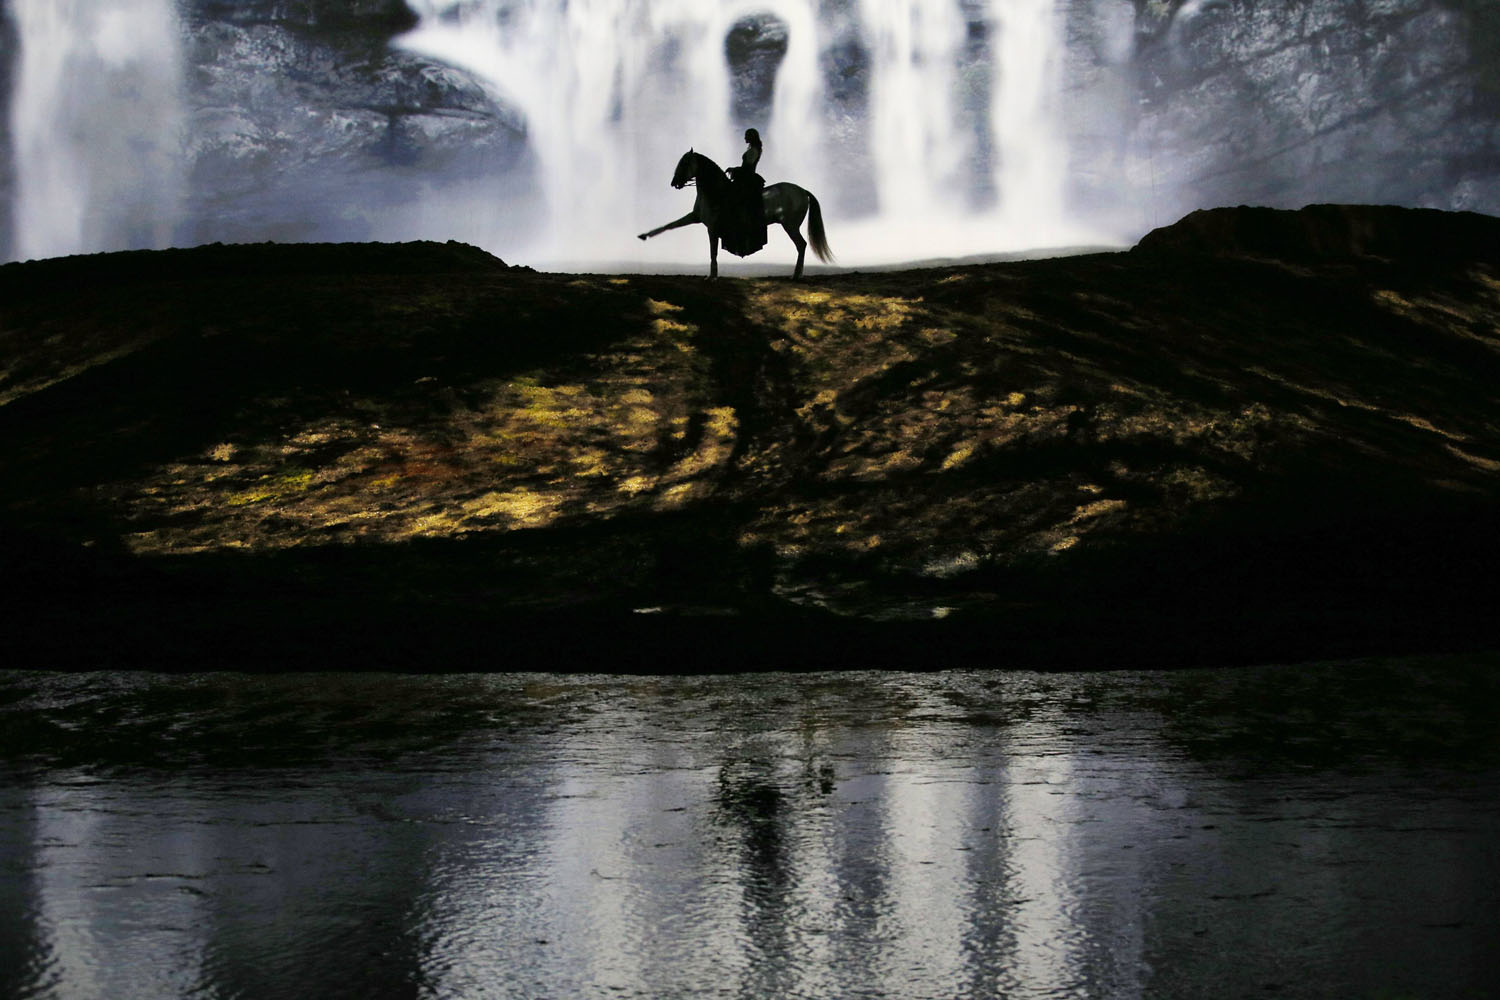 A horse and rider perform during a "sneak peek" performance of Cavalia's show "Odysseo" in Somerville